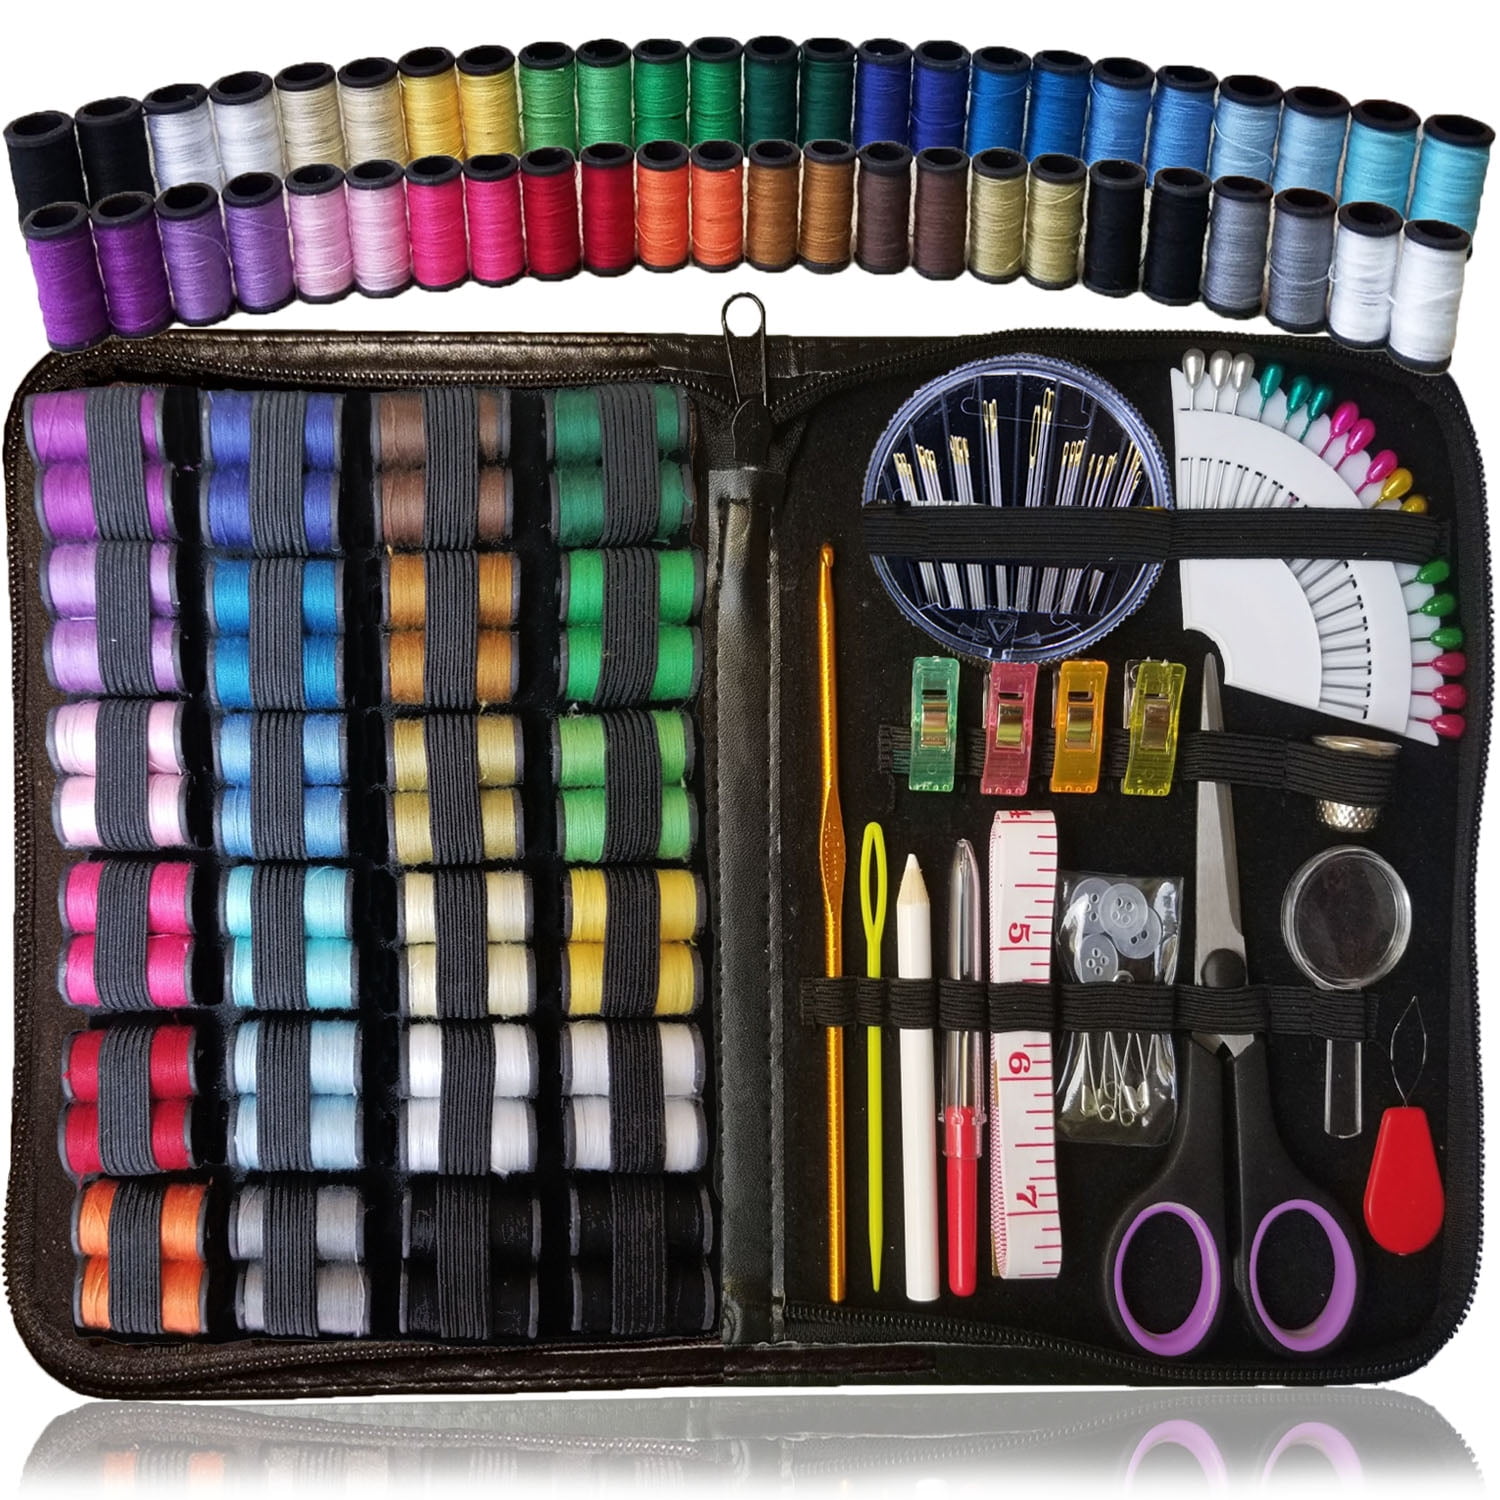 SEWING KIT, Over 110 Quality Sewing Supplies, 48 Spools of Thread, XL ...